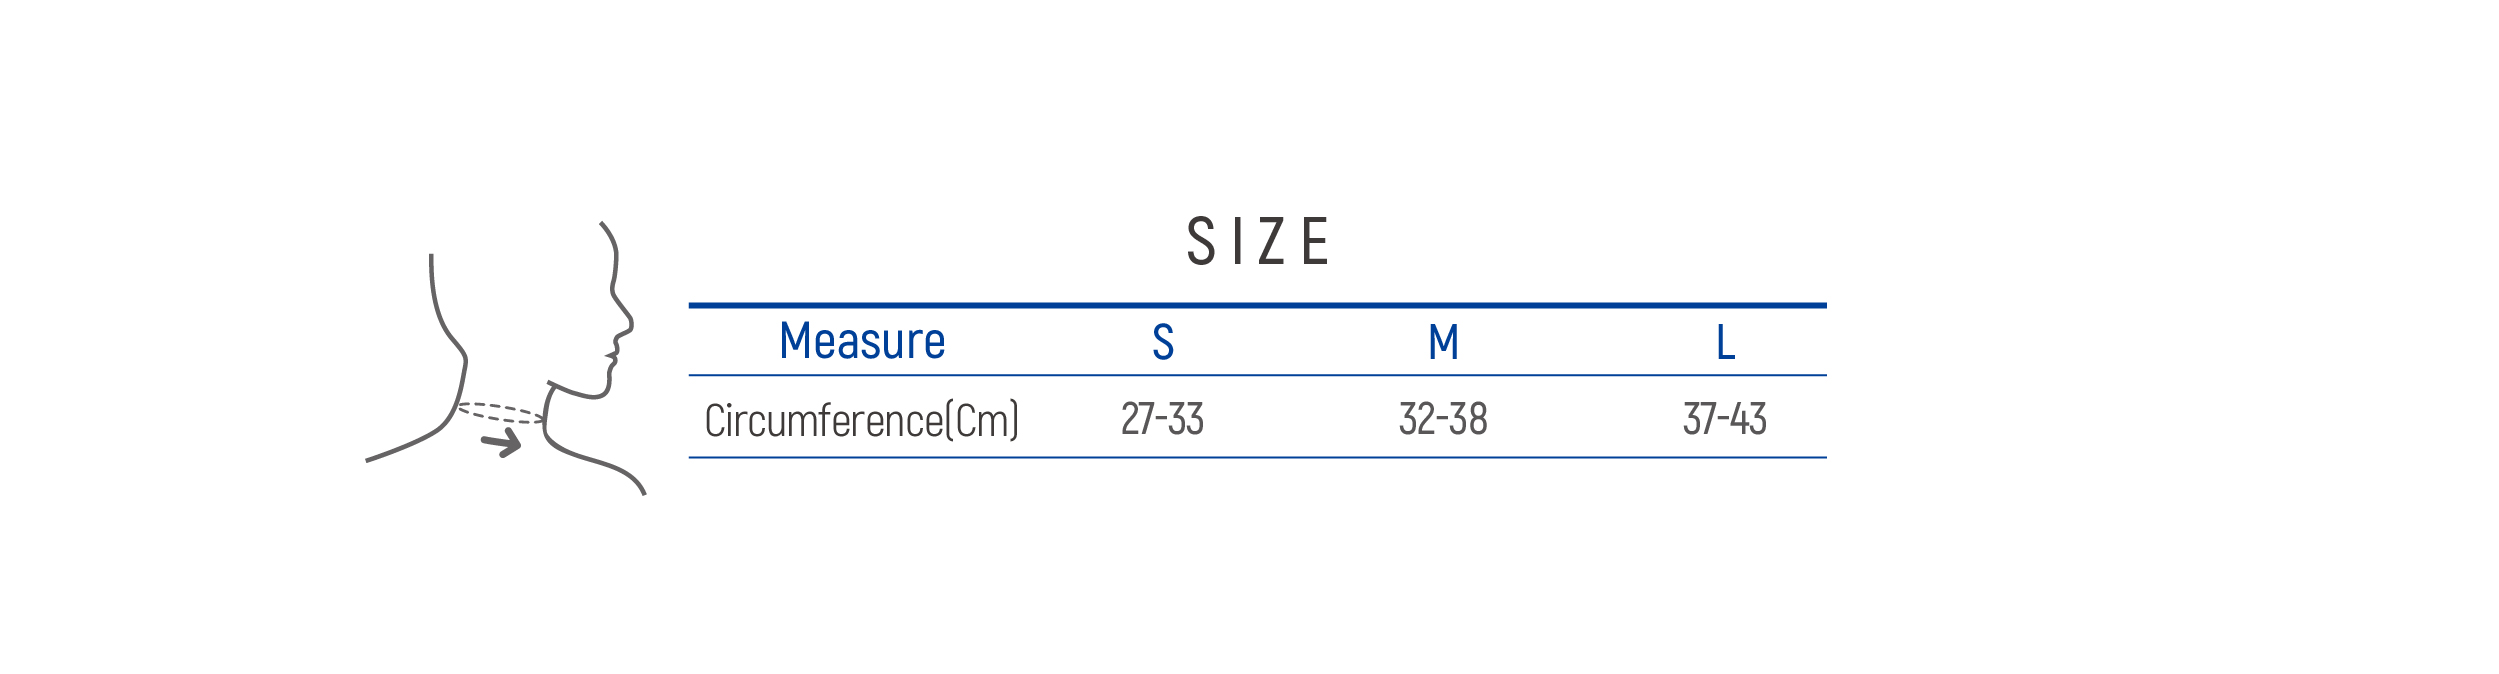 DR-122 Size table image